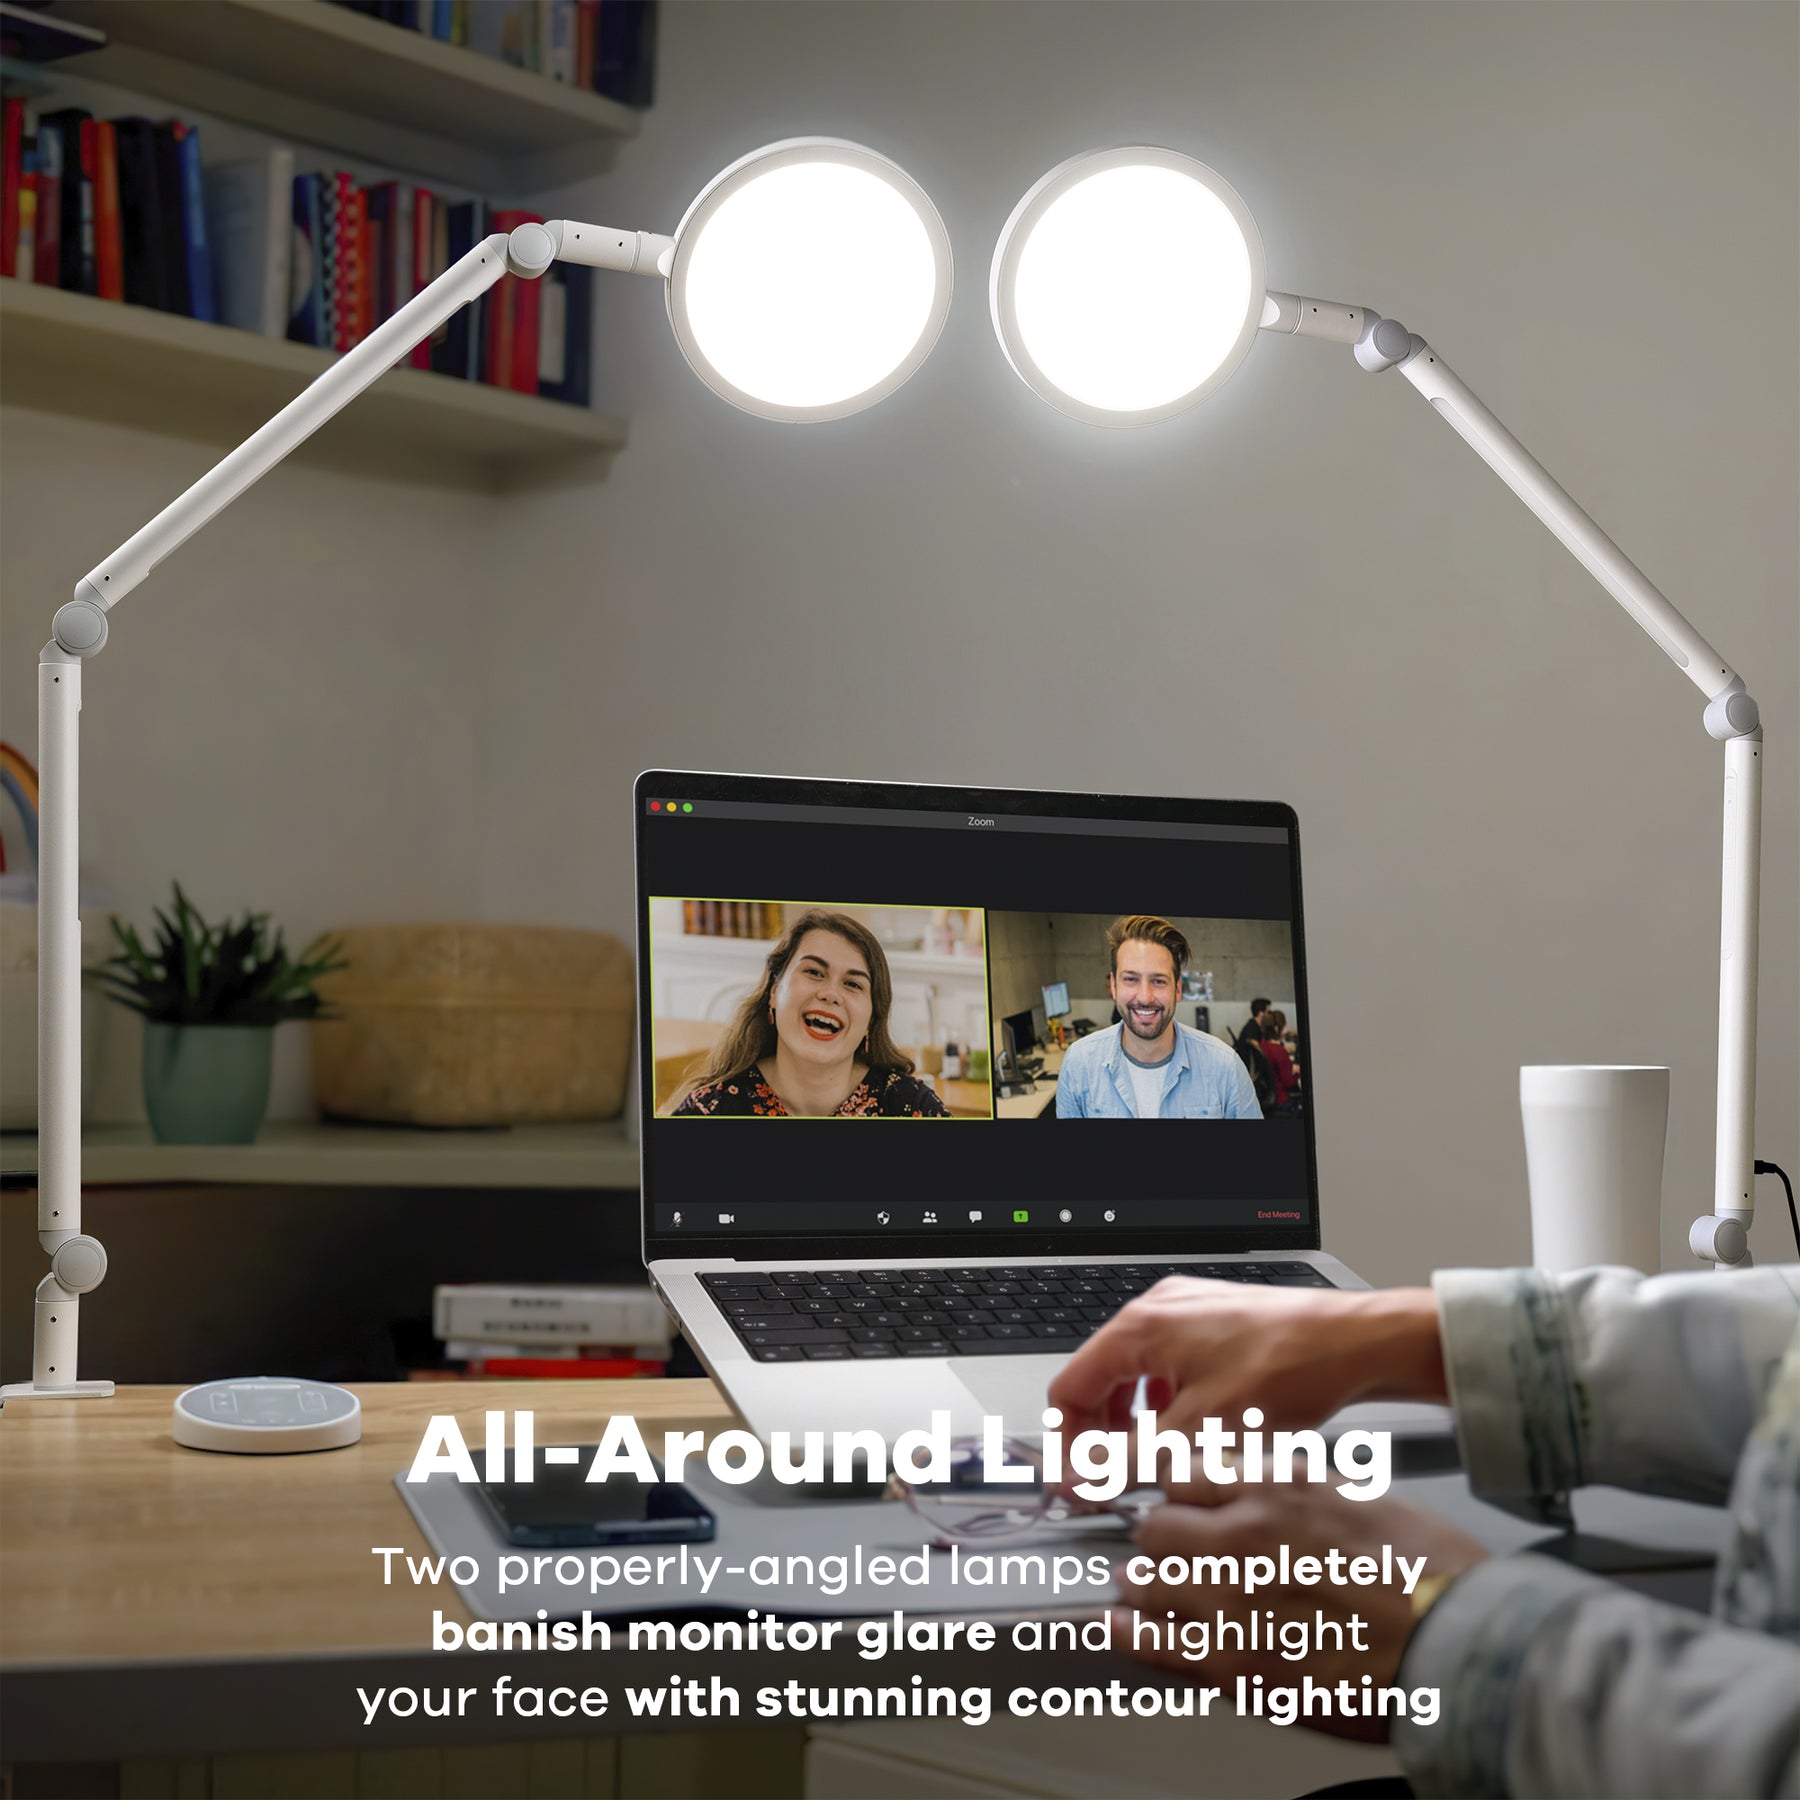 Dual Swing Arm Desk Lamp for Home Office, Eye-Care Double Head Desk Light  with